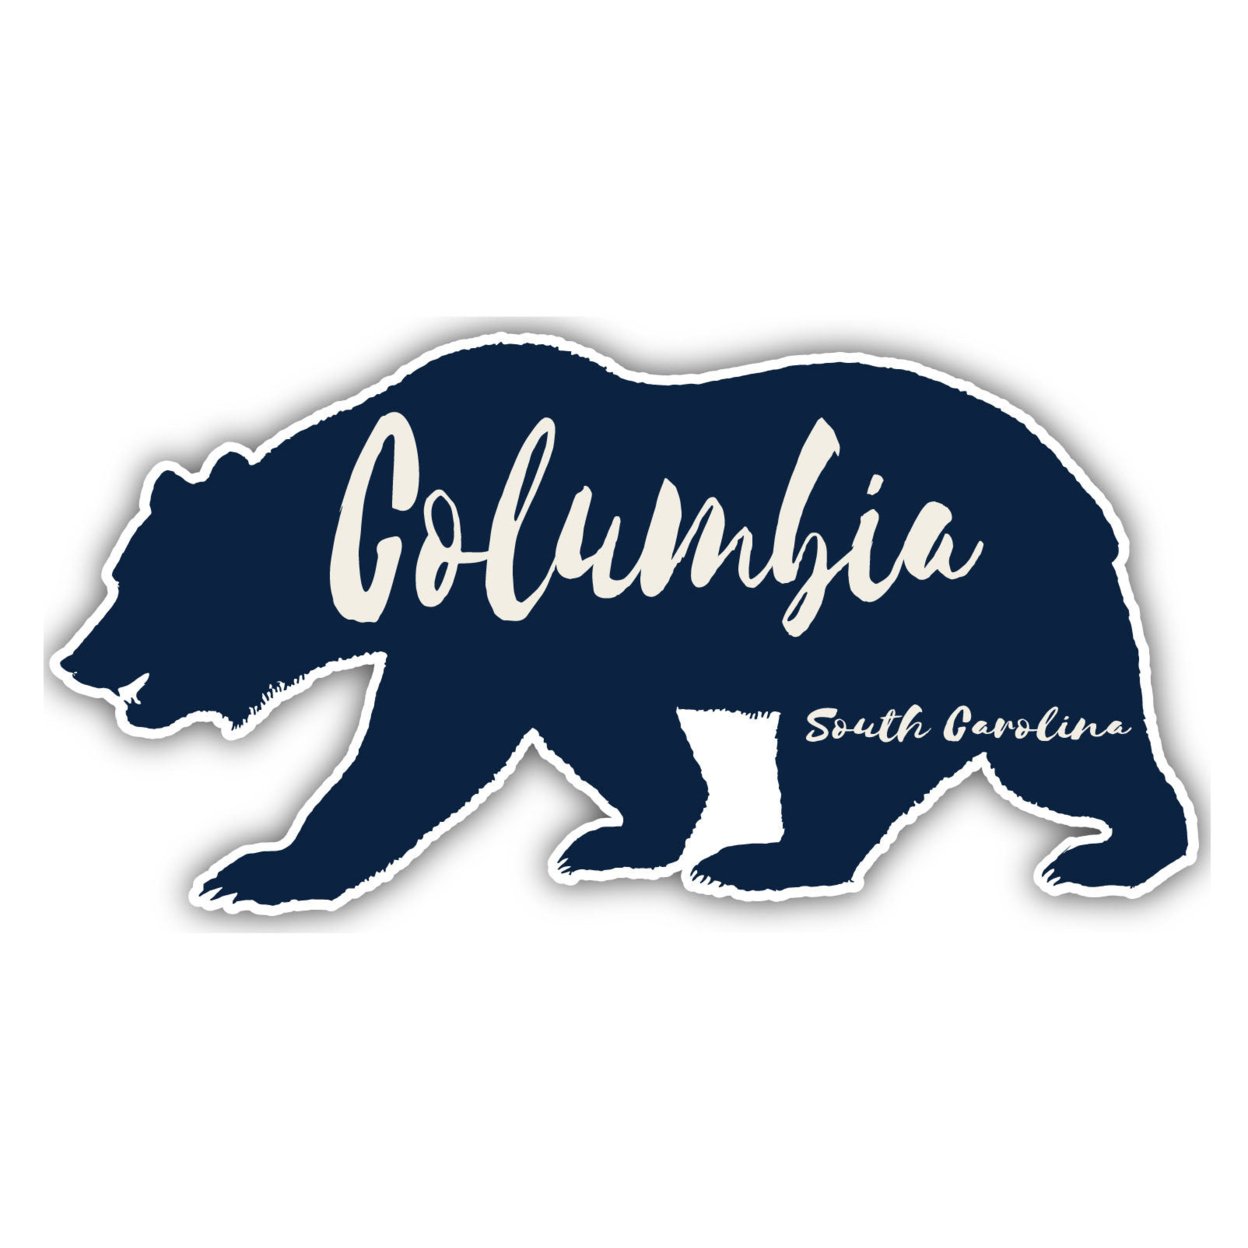 Columbia South Carolina Souvenir Decorative Stickers (Choose Theme And Size) - 4-Pack, 12-Inch, Bear